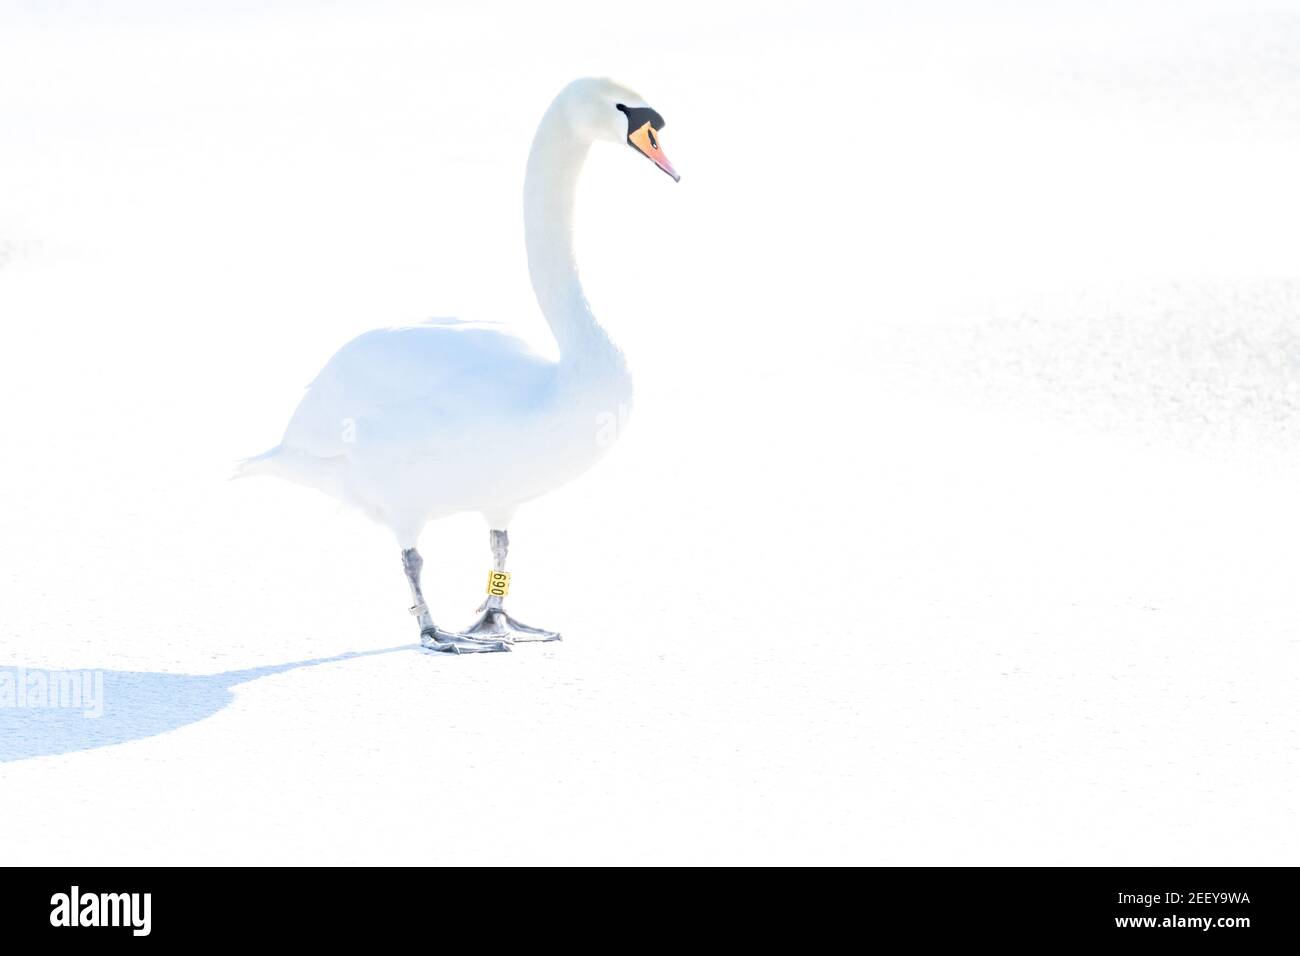 A mute swan walking on a snow covered frozen lake in Baildon, Yorkshire, England. Stock Photo